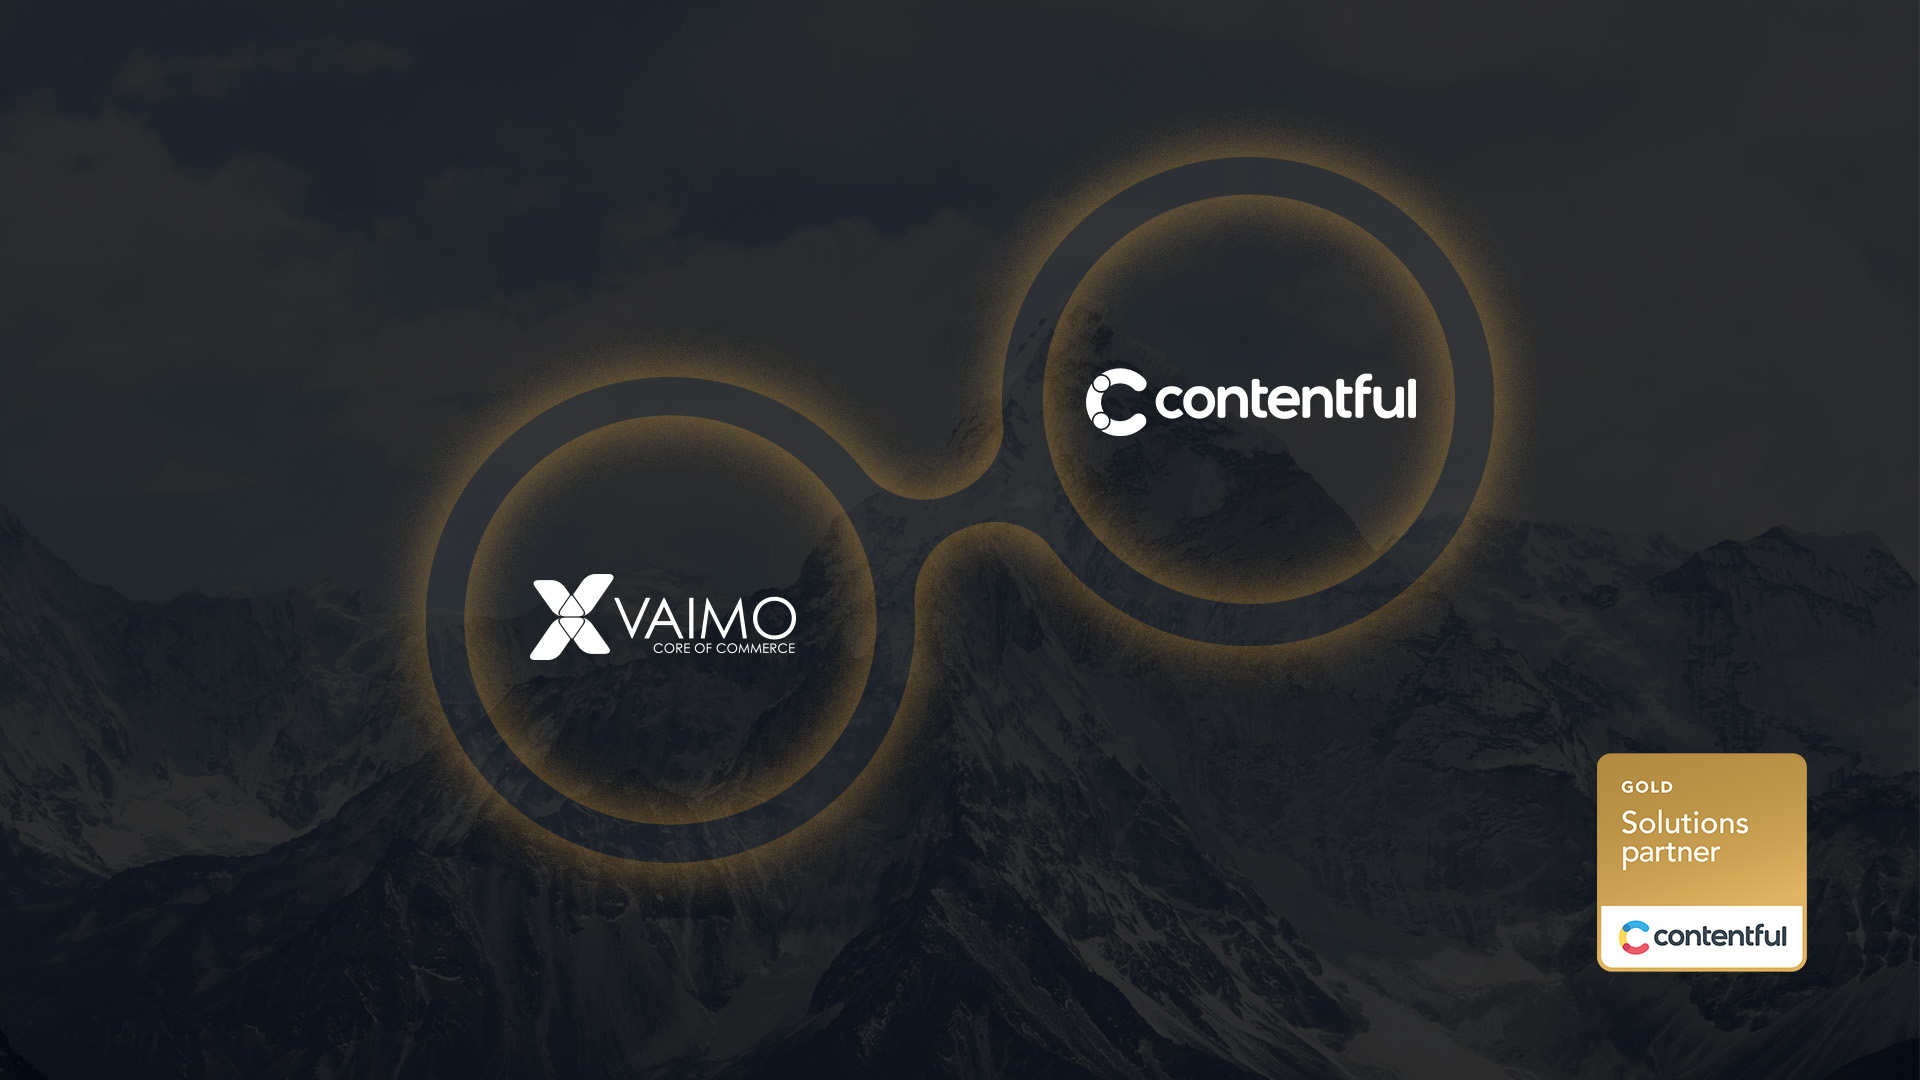 Image illustrating the partnership between Vaimo and Contentful.